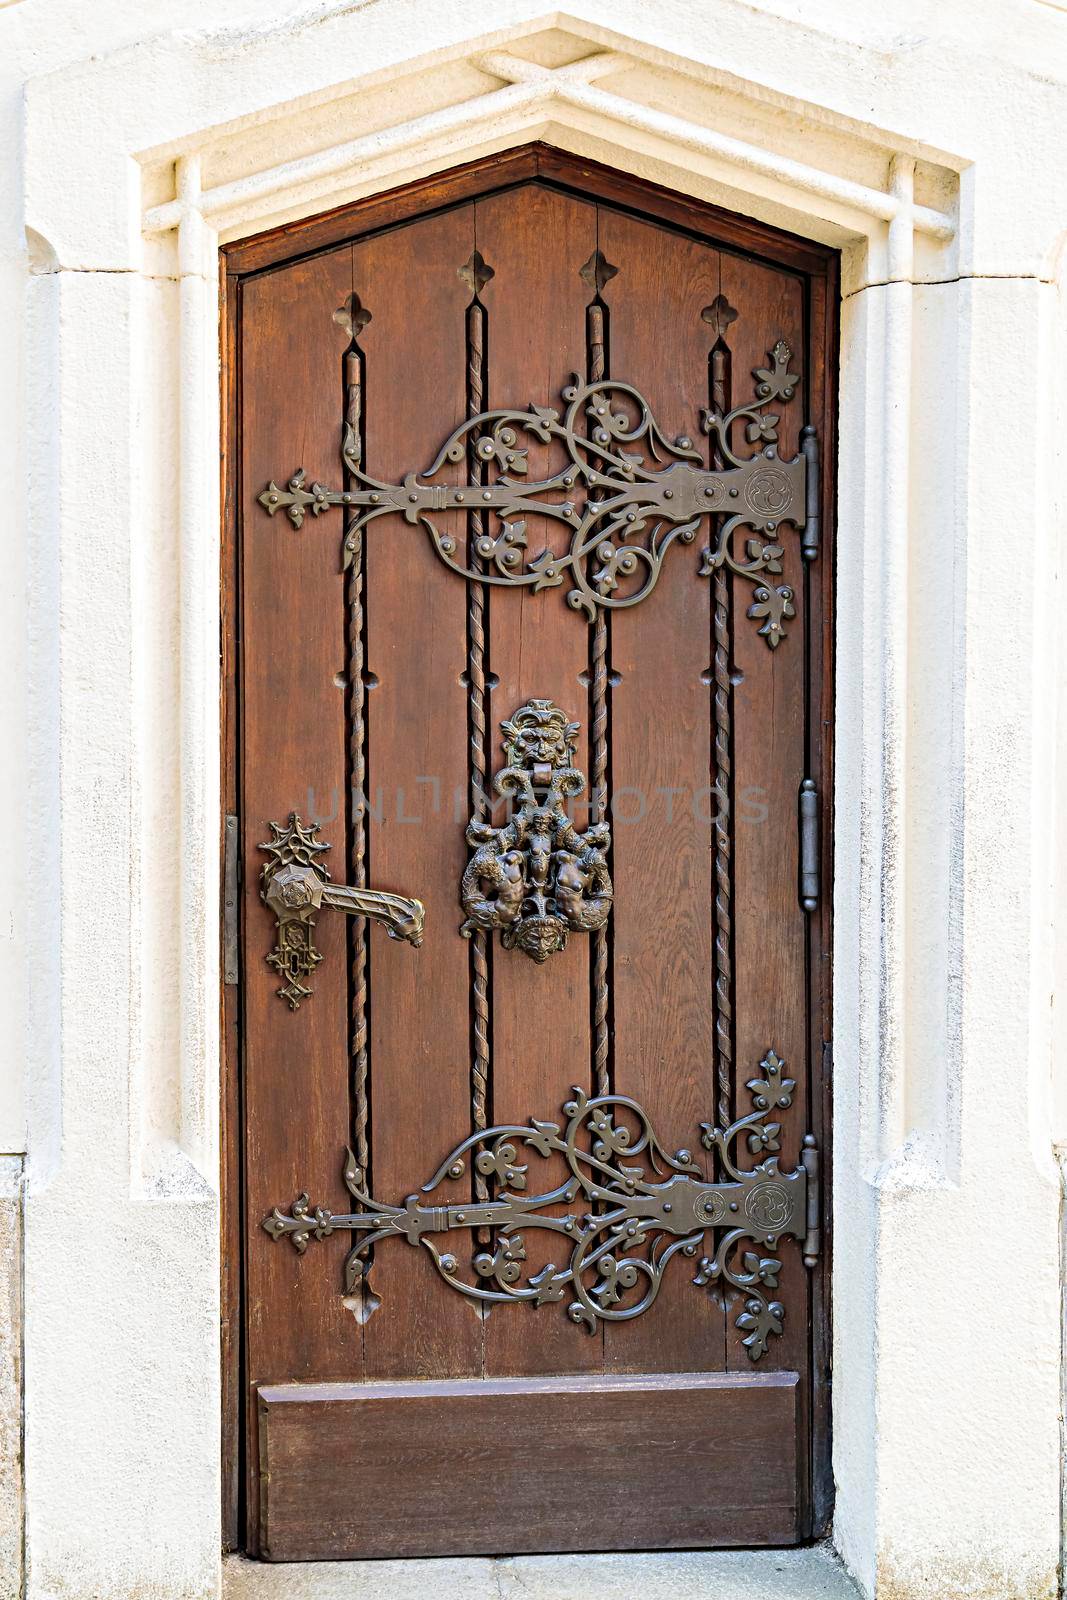 Light brown, antique wooden doors with carvings and patterns. Metal handles made of gold. A semicircular vault. Entrance to the house.